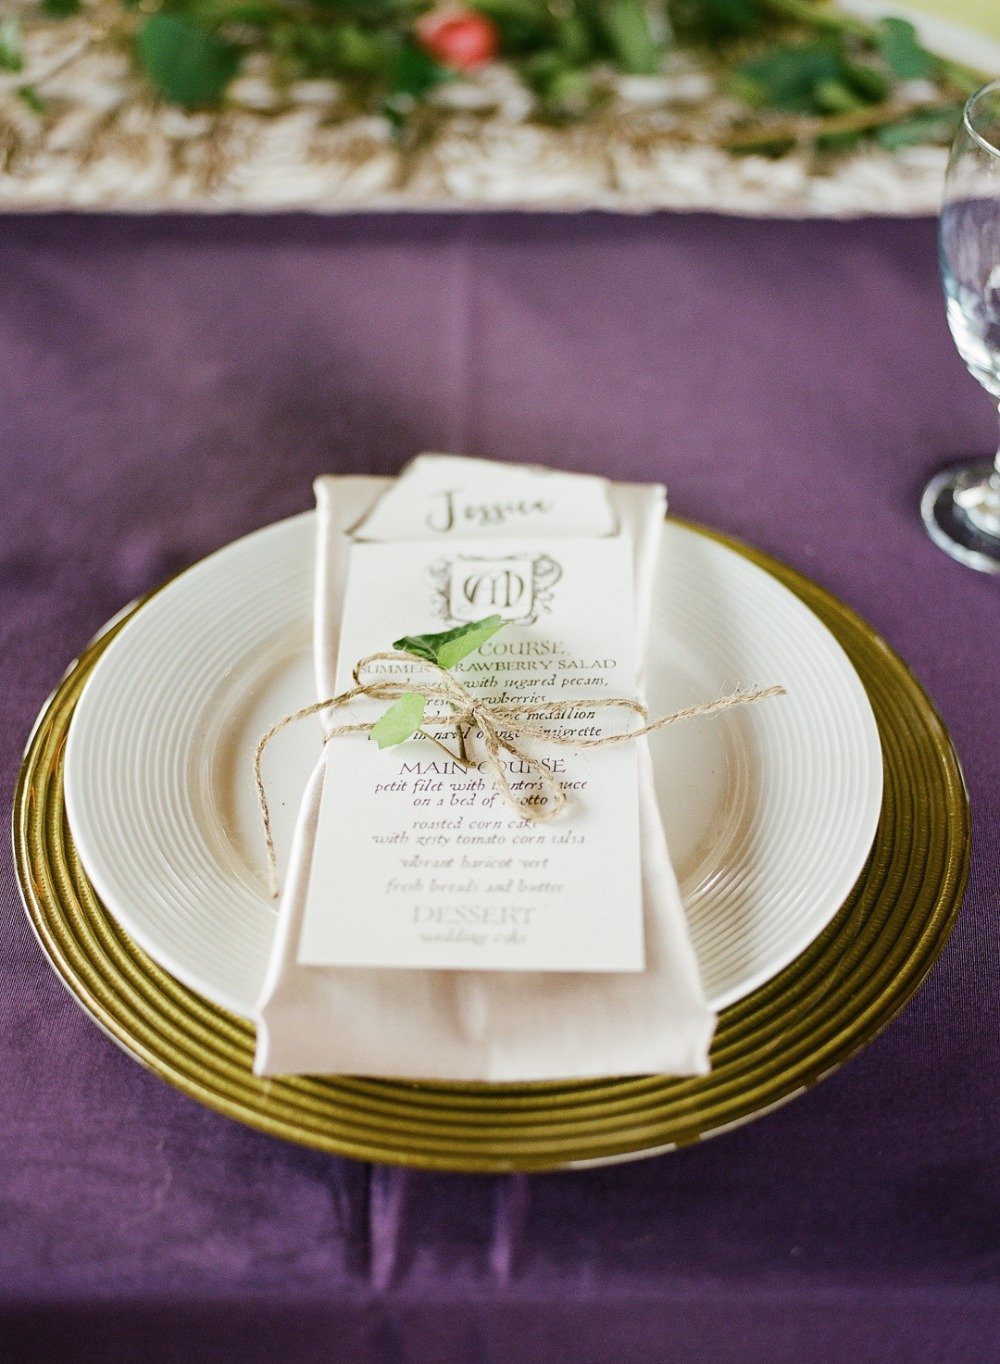 Harry Potter themed place setting